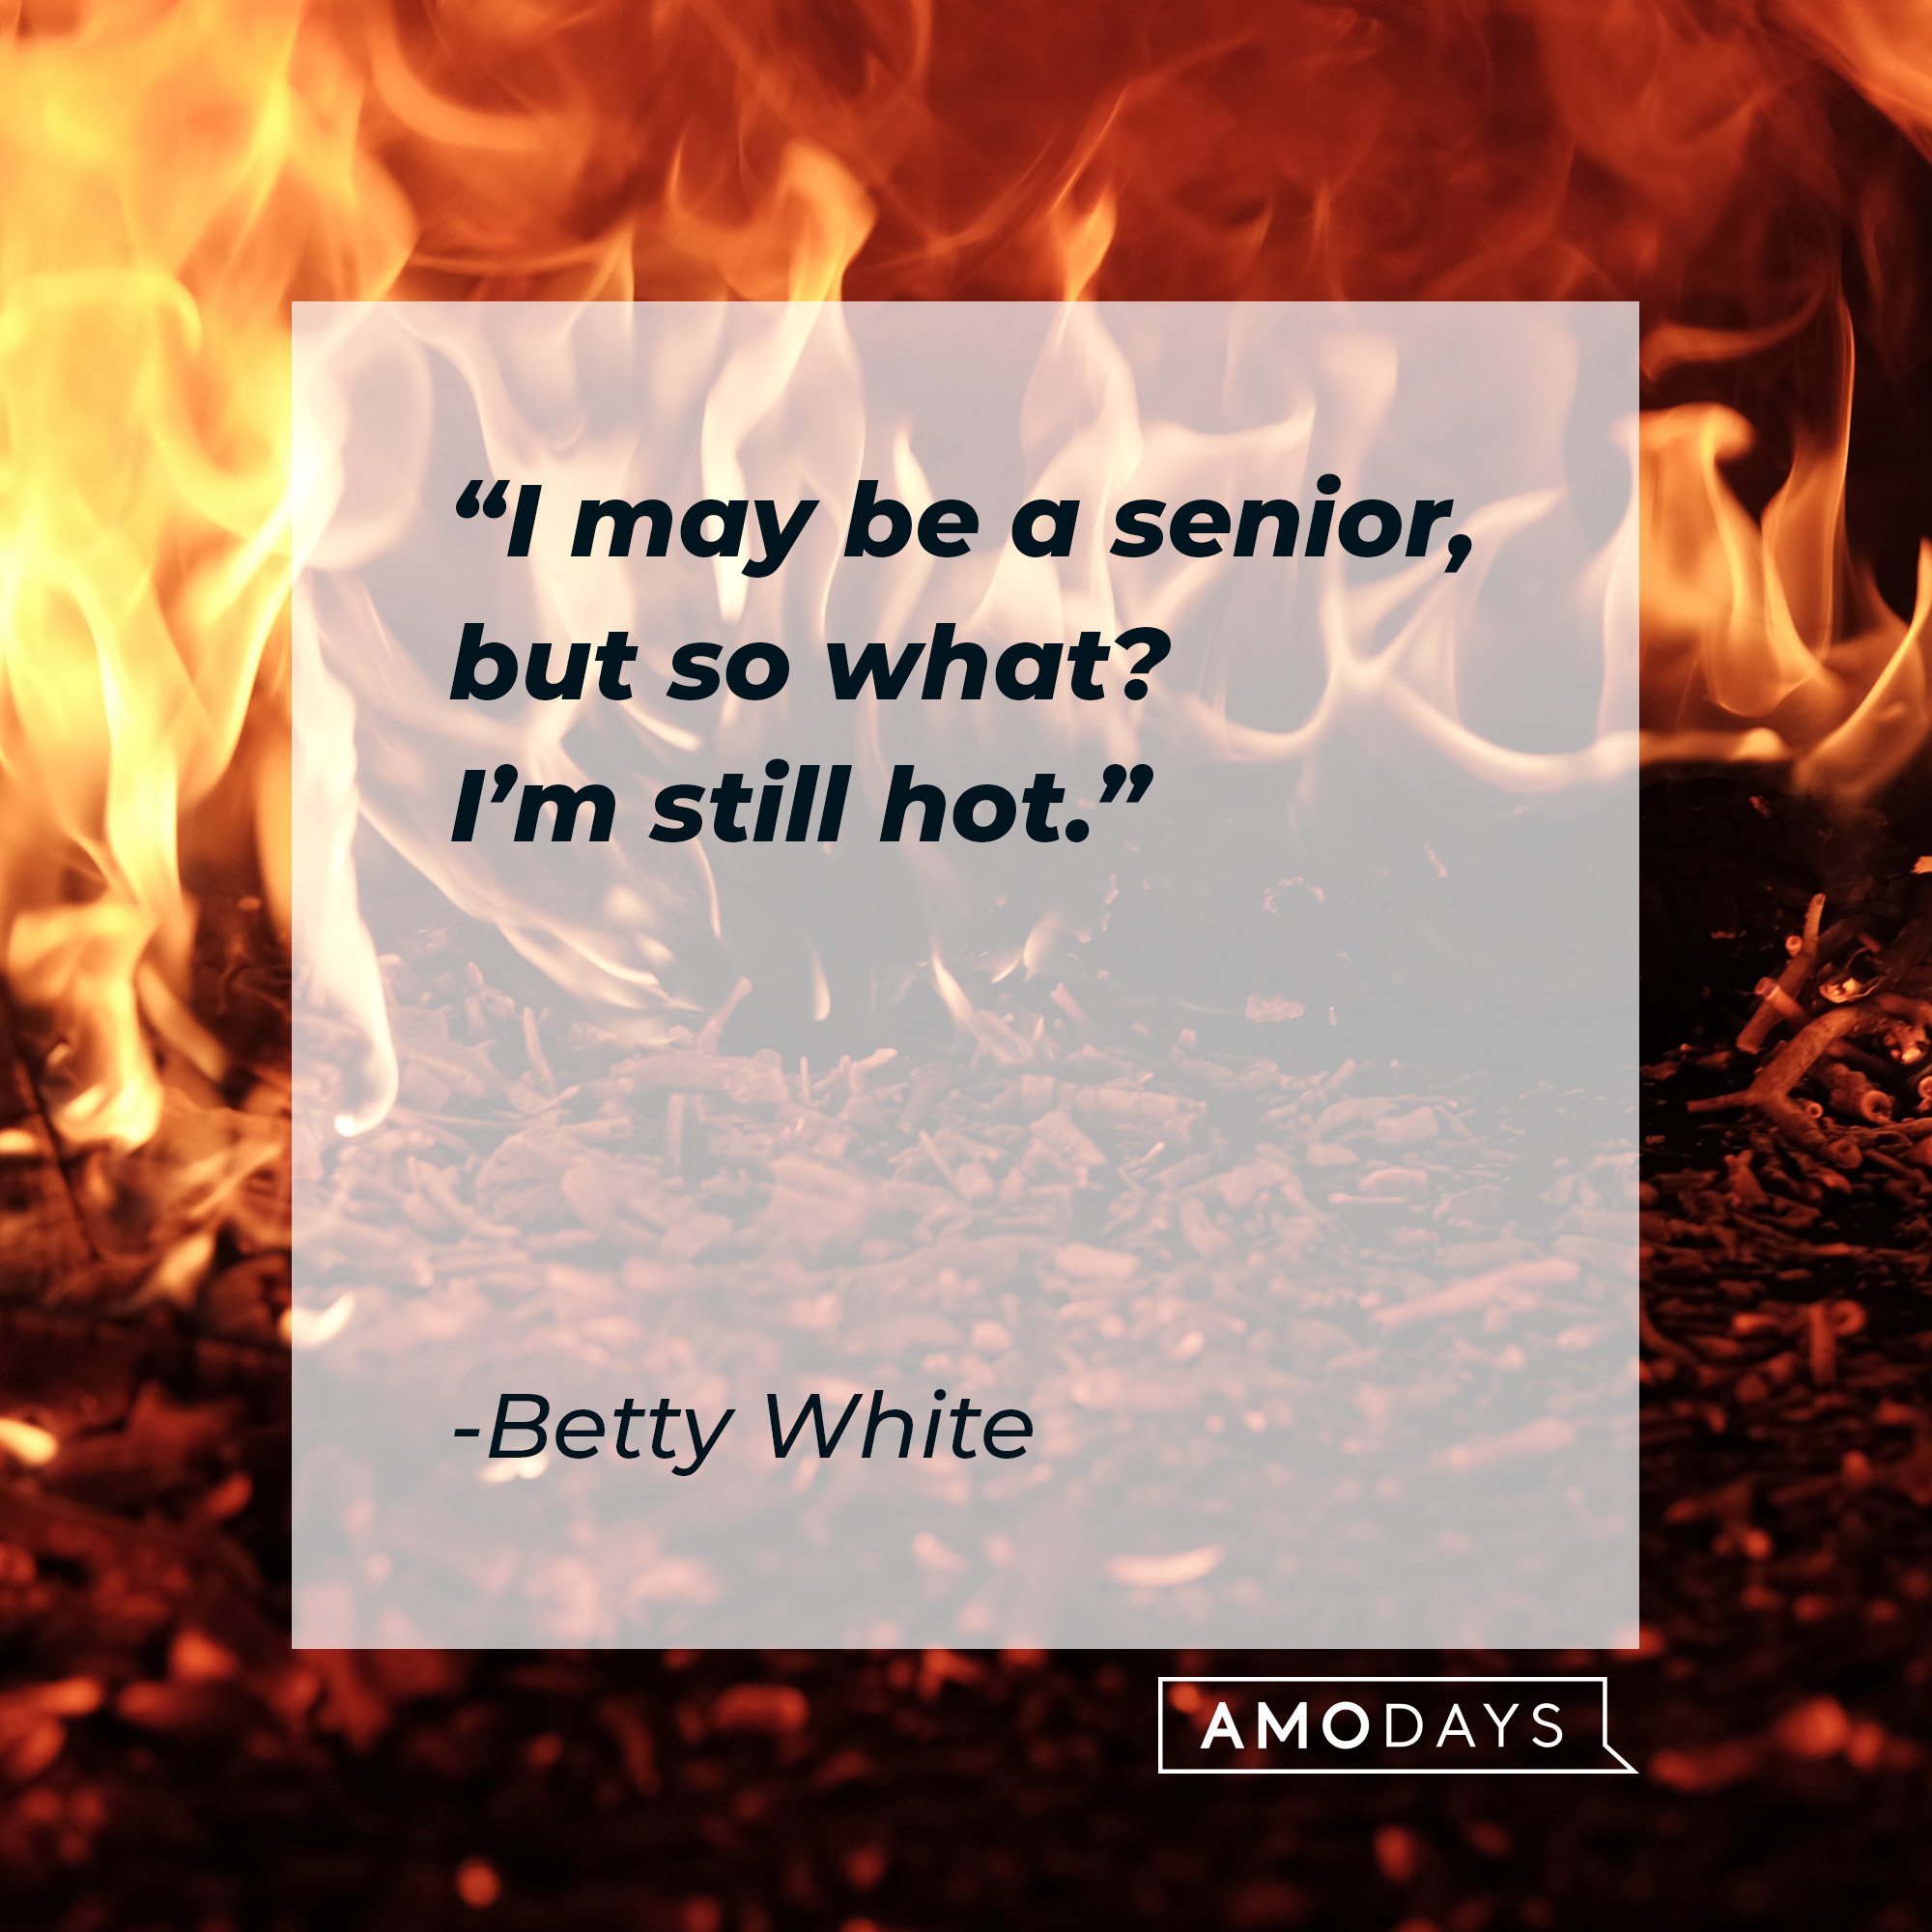 Betty White’s quote: "I may be a senior, but so what? I’m still hot." | Image: AmoDays 